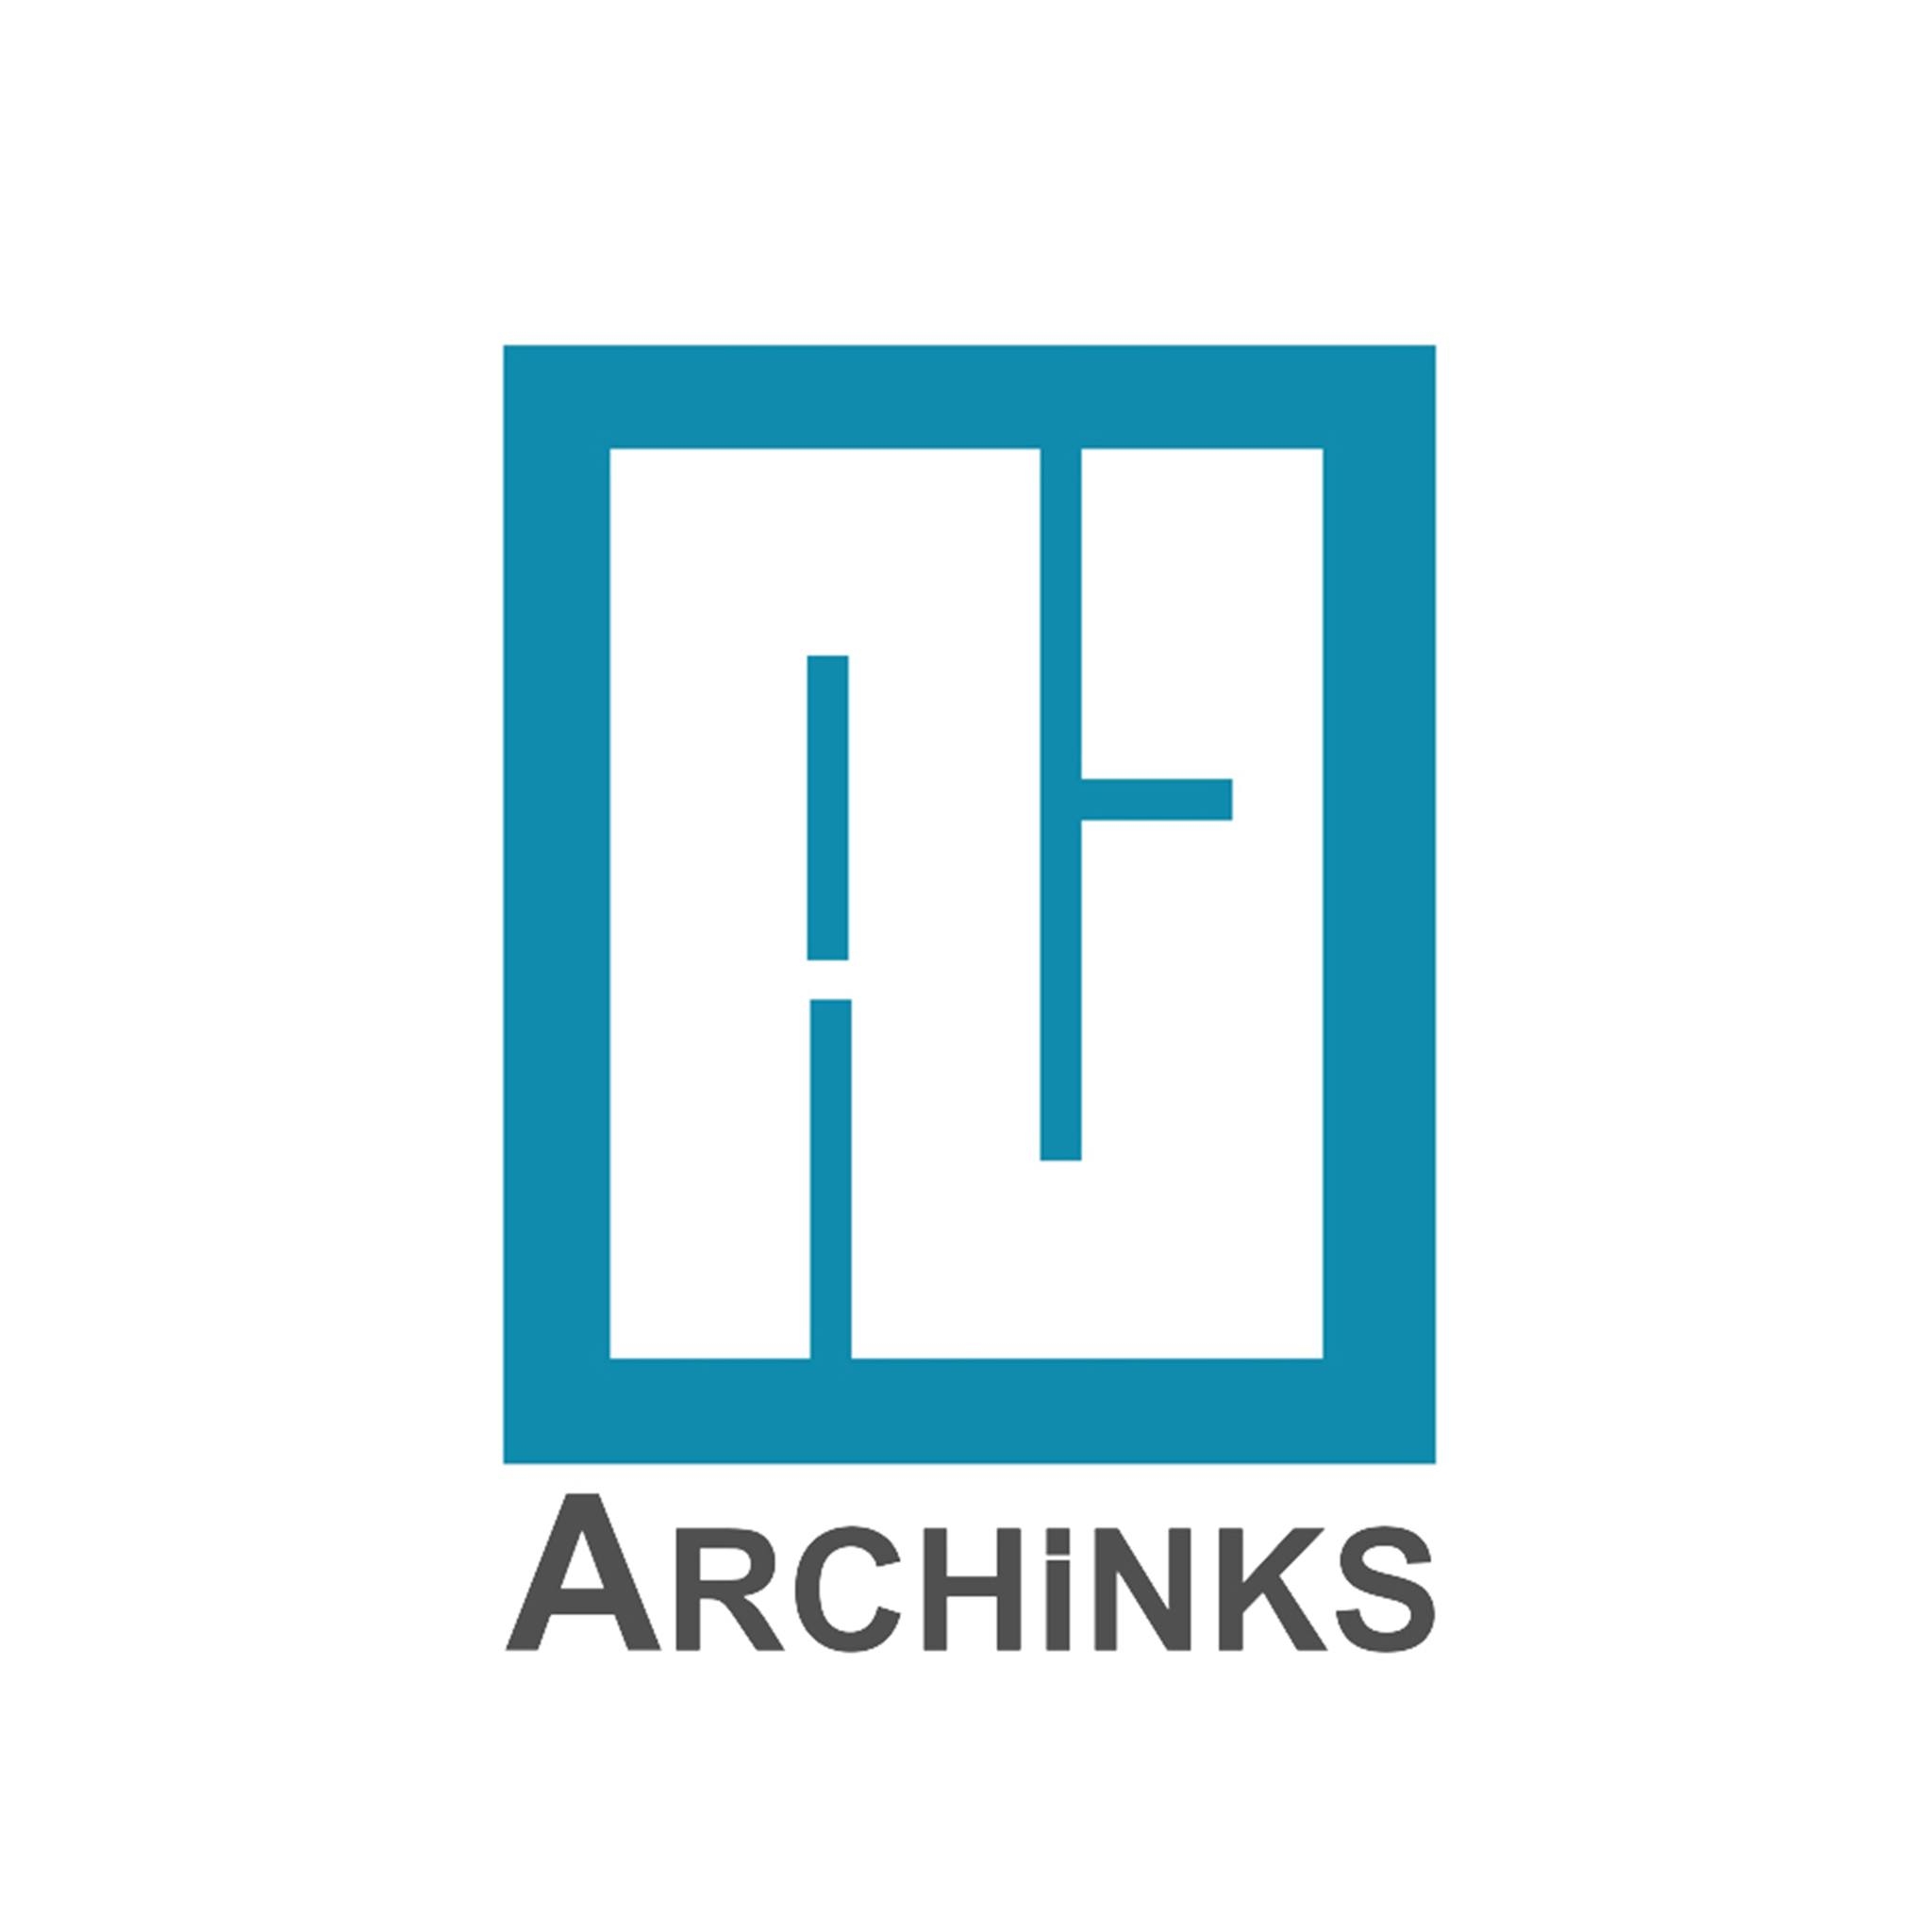 Archinks Indore (Architects | Planners | Interior Designers)|Legal Services|Professional Services